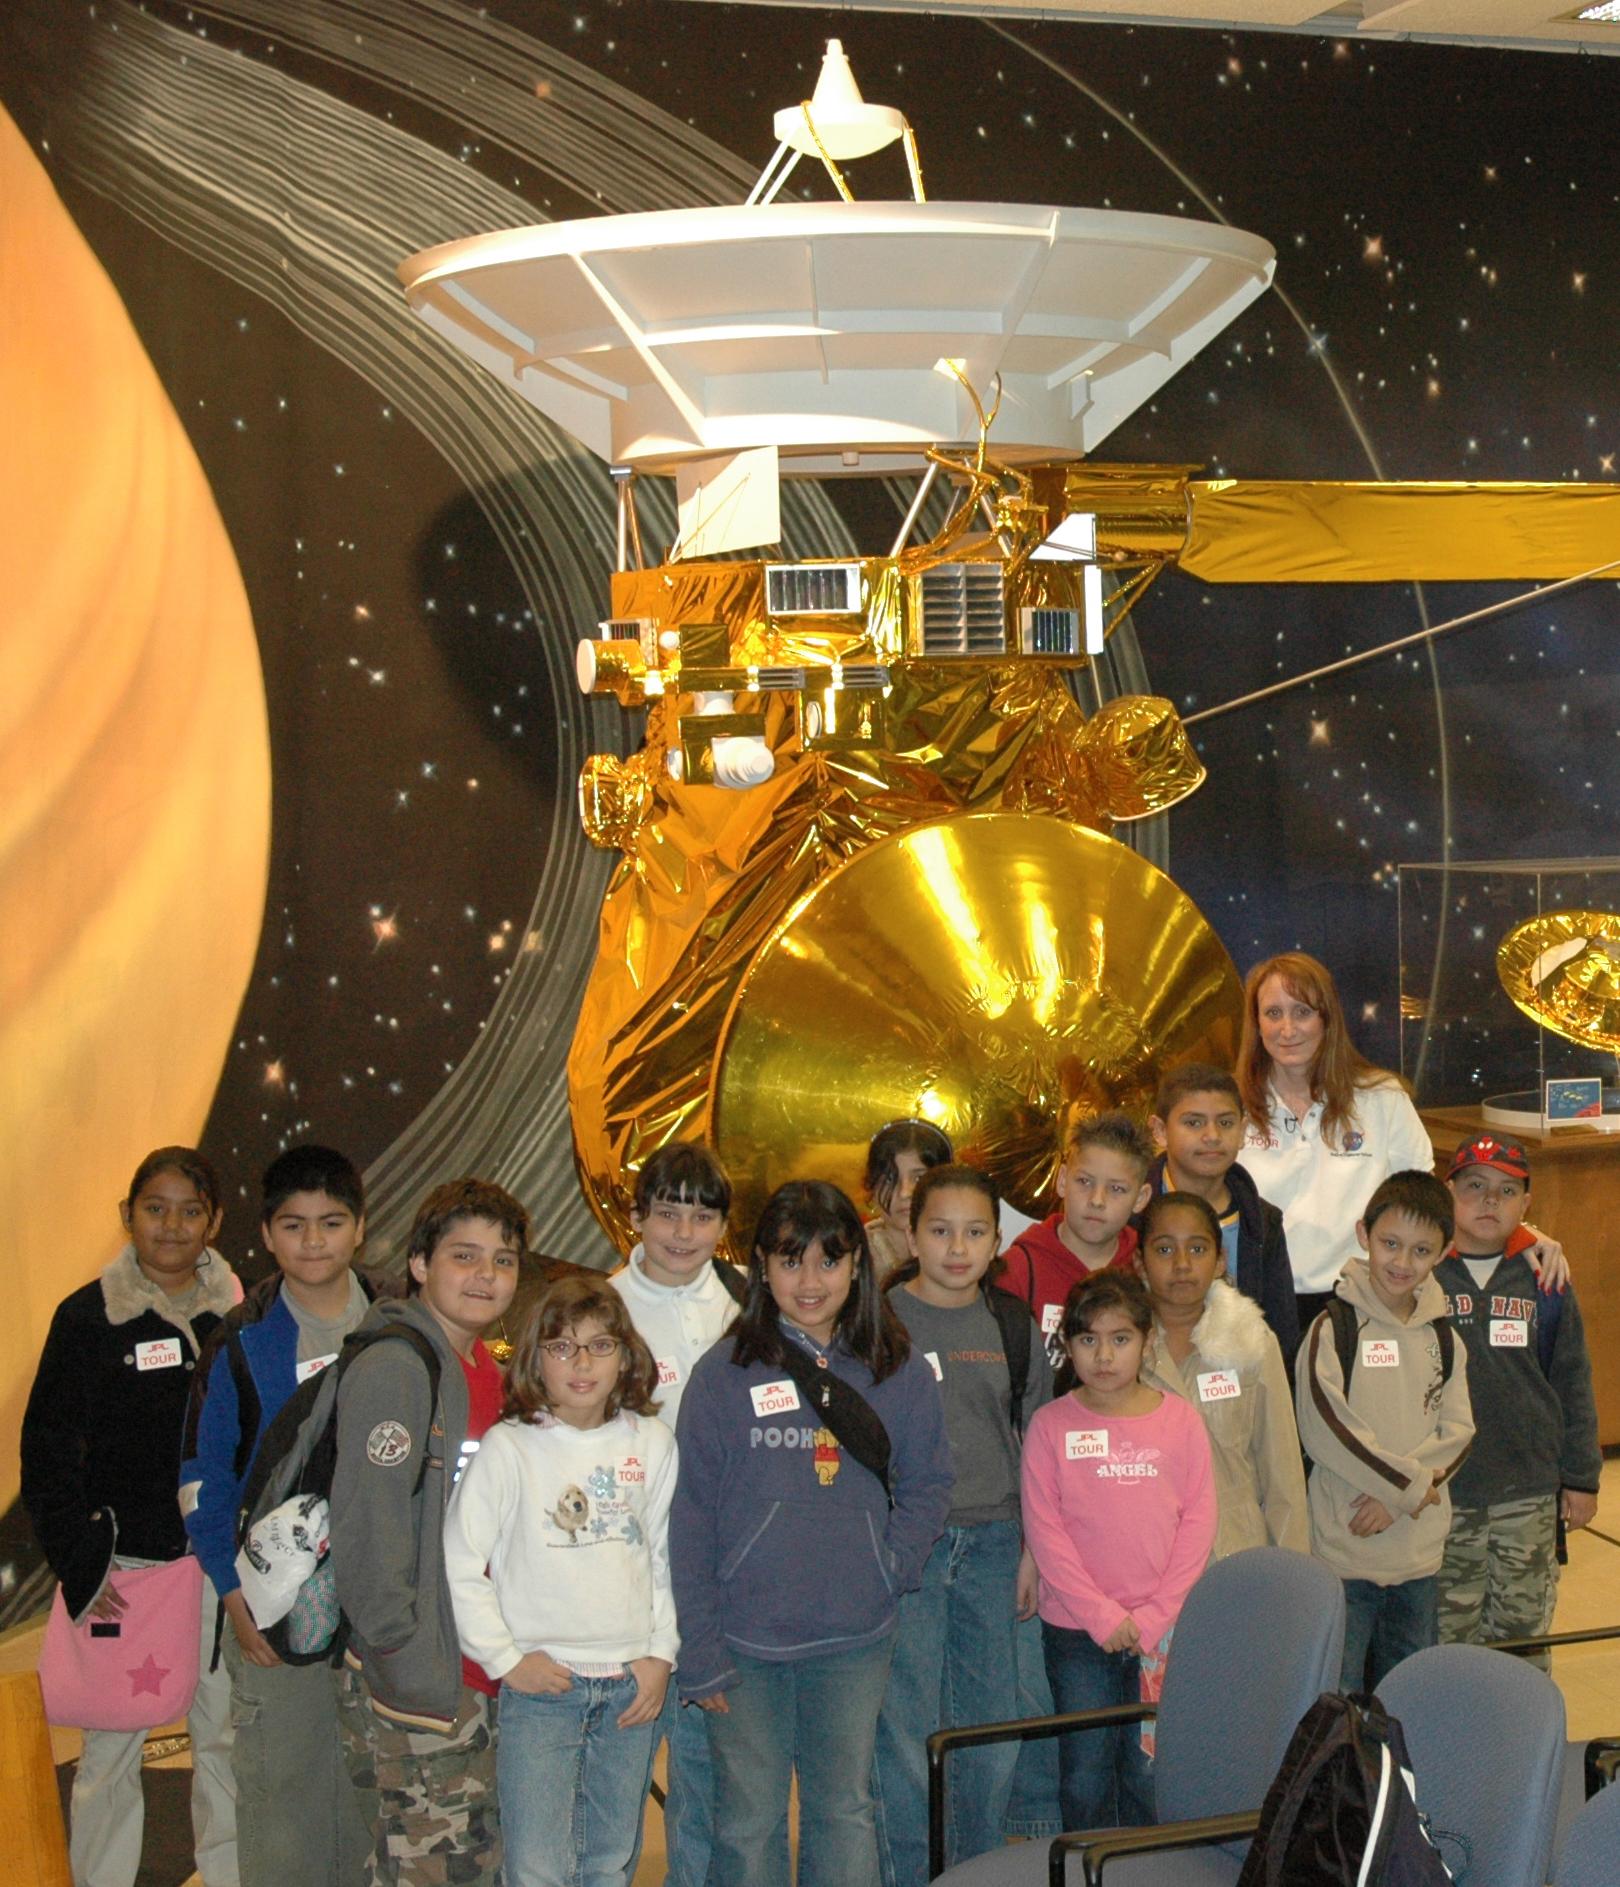 Students and their teacher pose in front of a half-scale model of Cassini